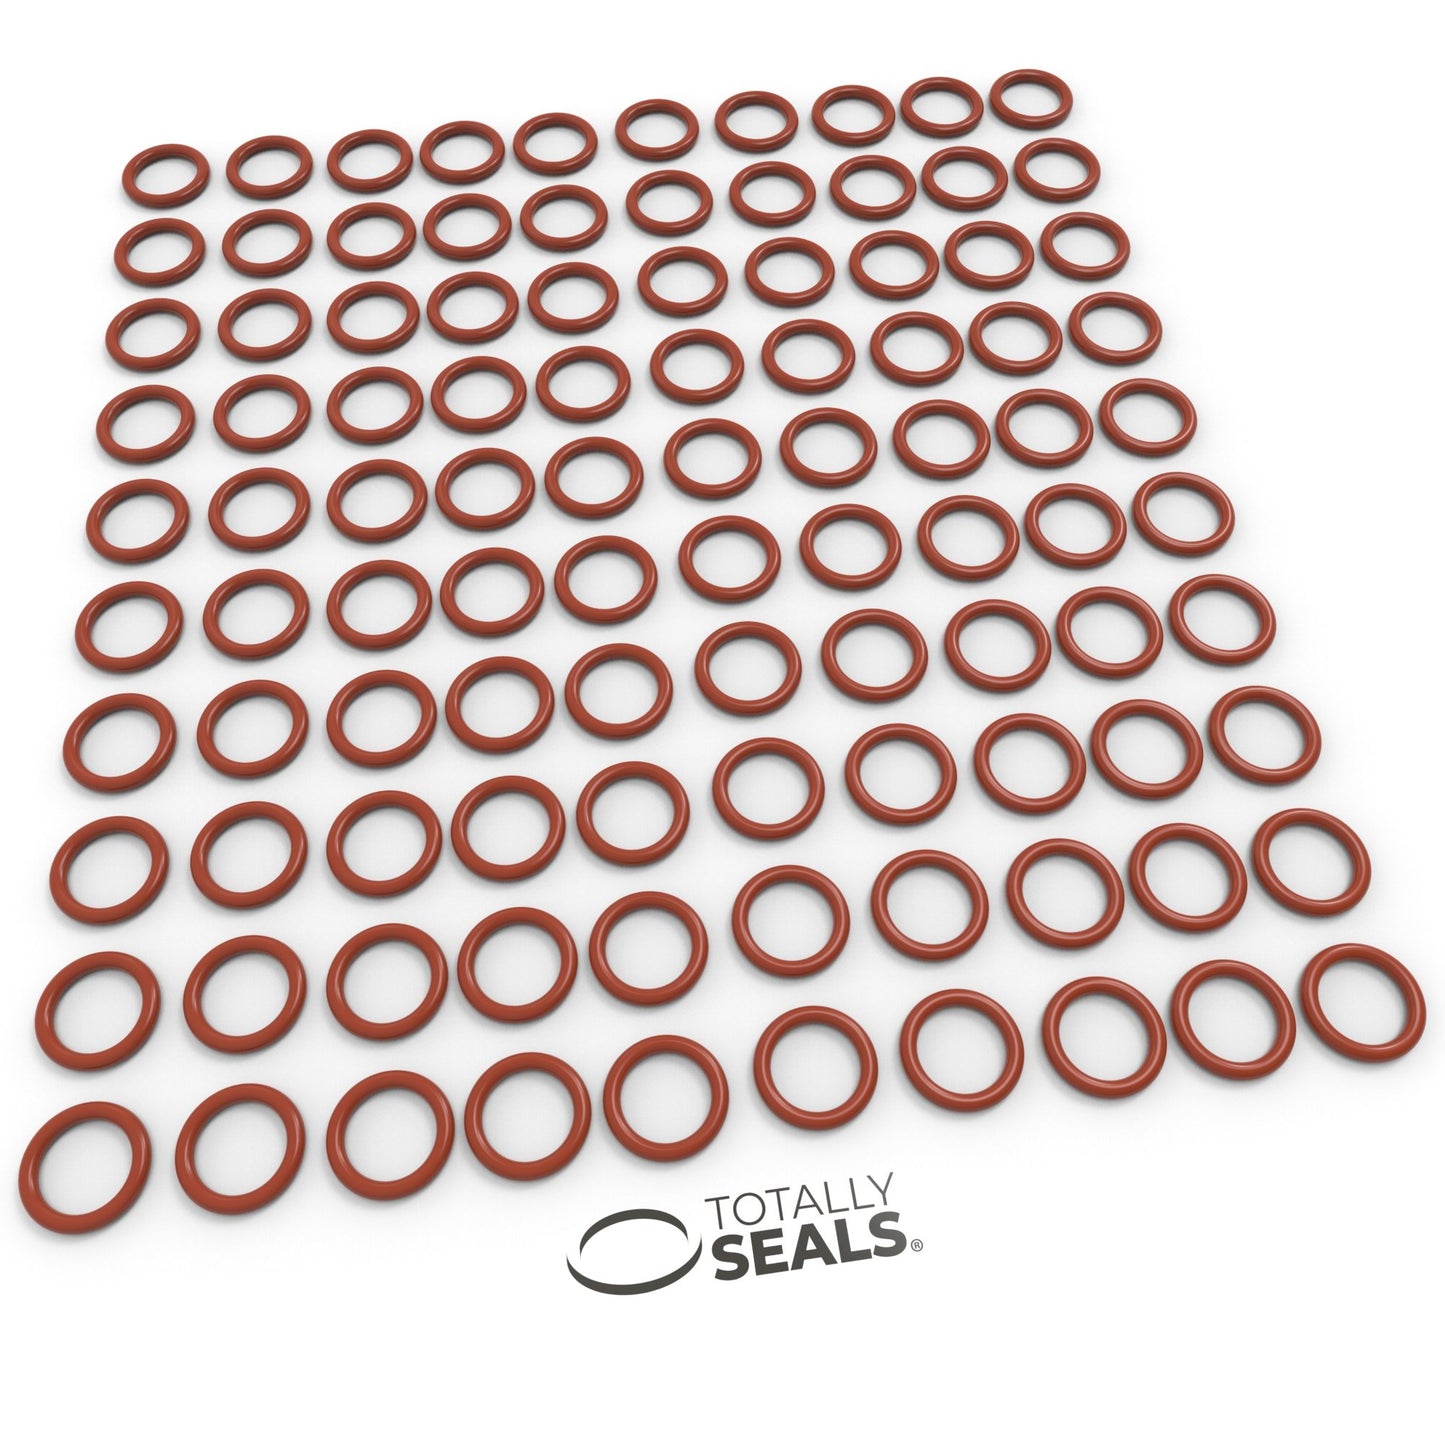 20mm x 2.5mm (25mm OD) Silicone O-Rings - Totally Seals®